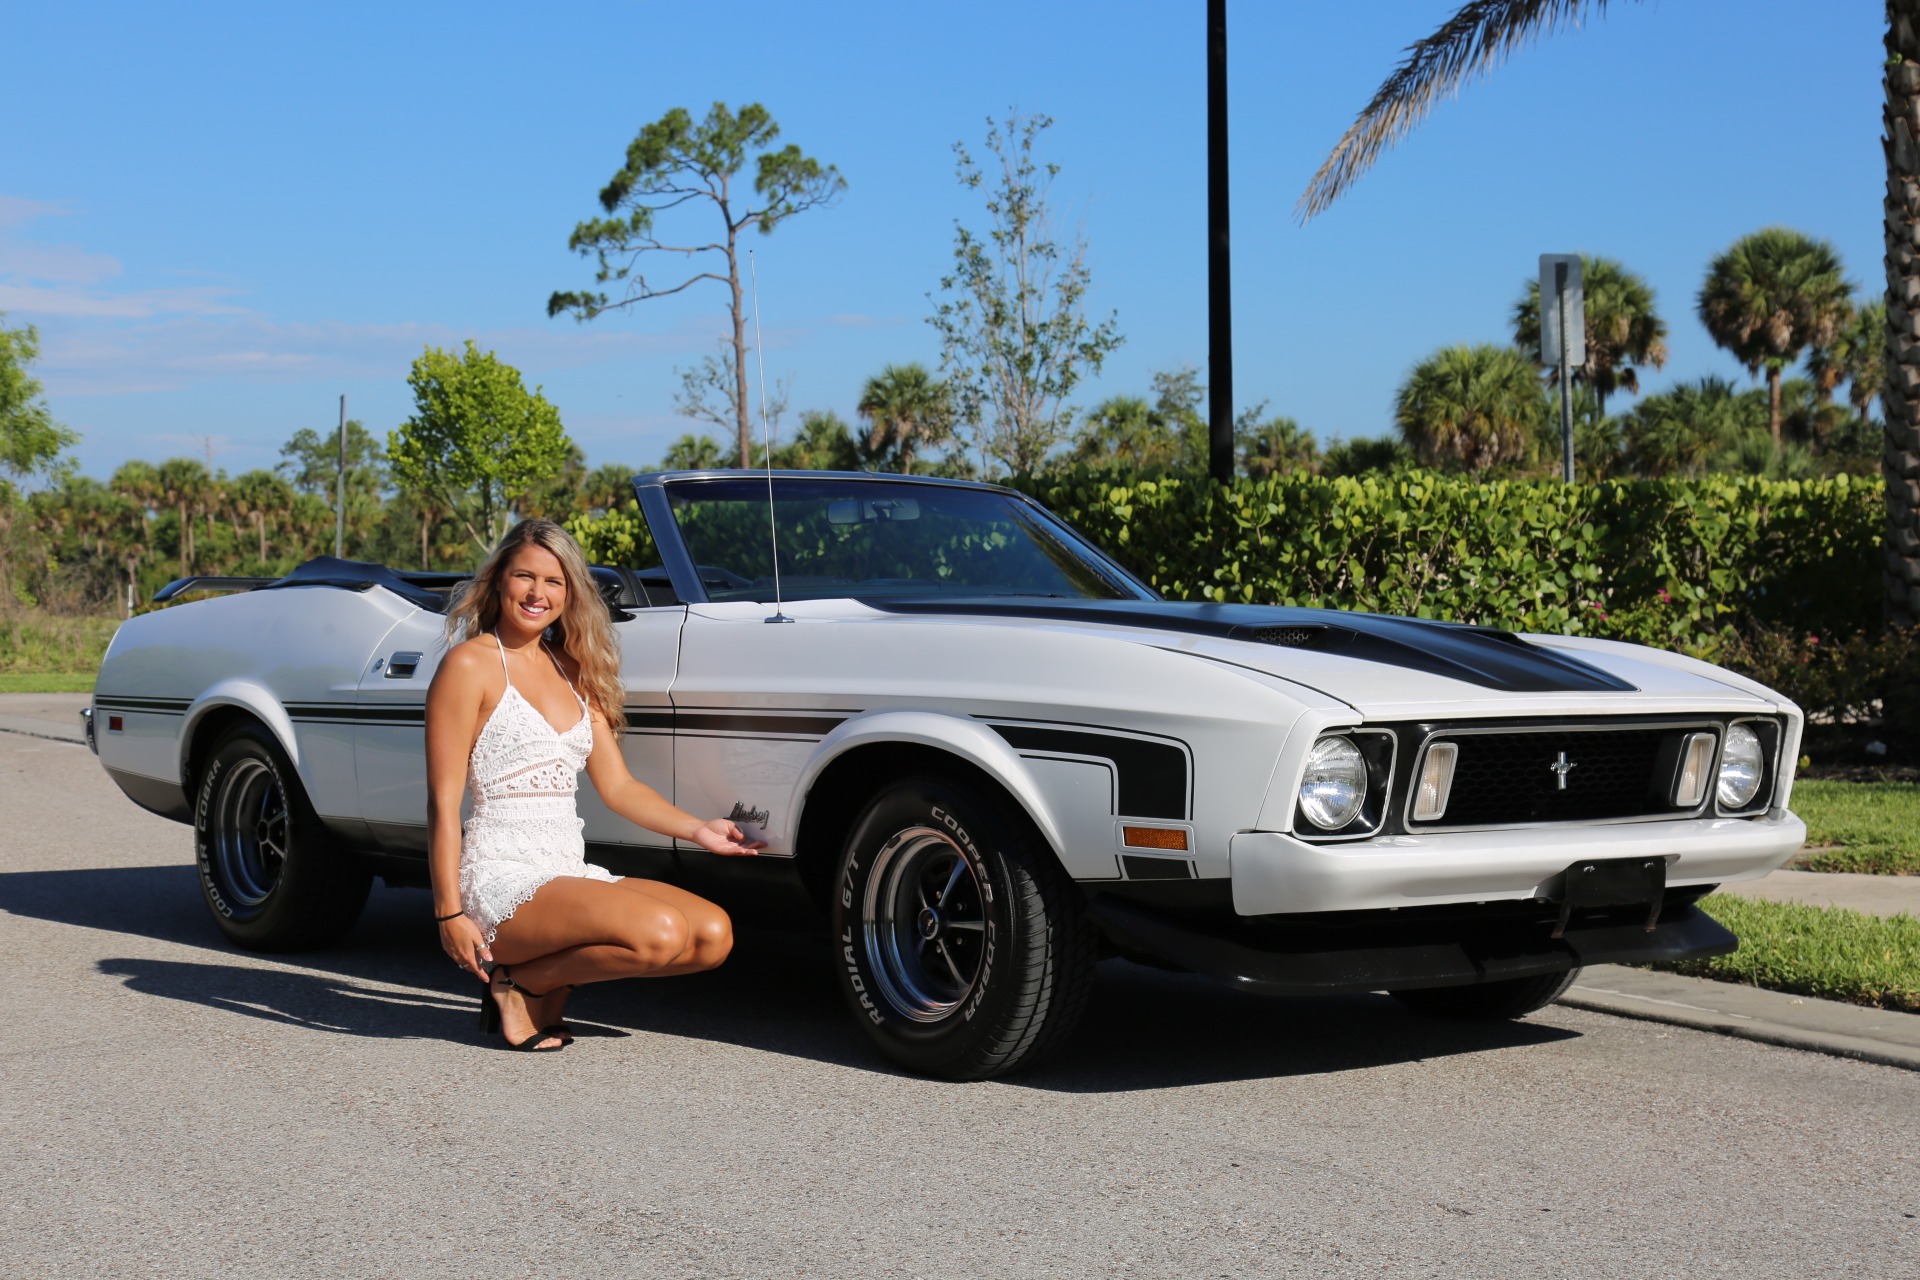 Used 1973 Ford Mustang Convertible for sale Sold at Muscle Cars for Sale Inc. in Fort Myers FL 33912 1